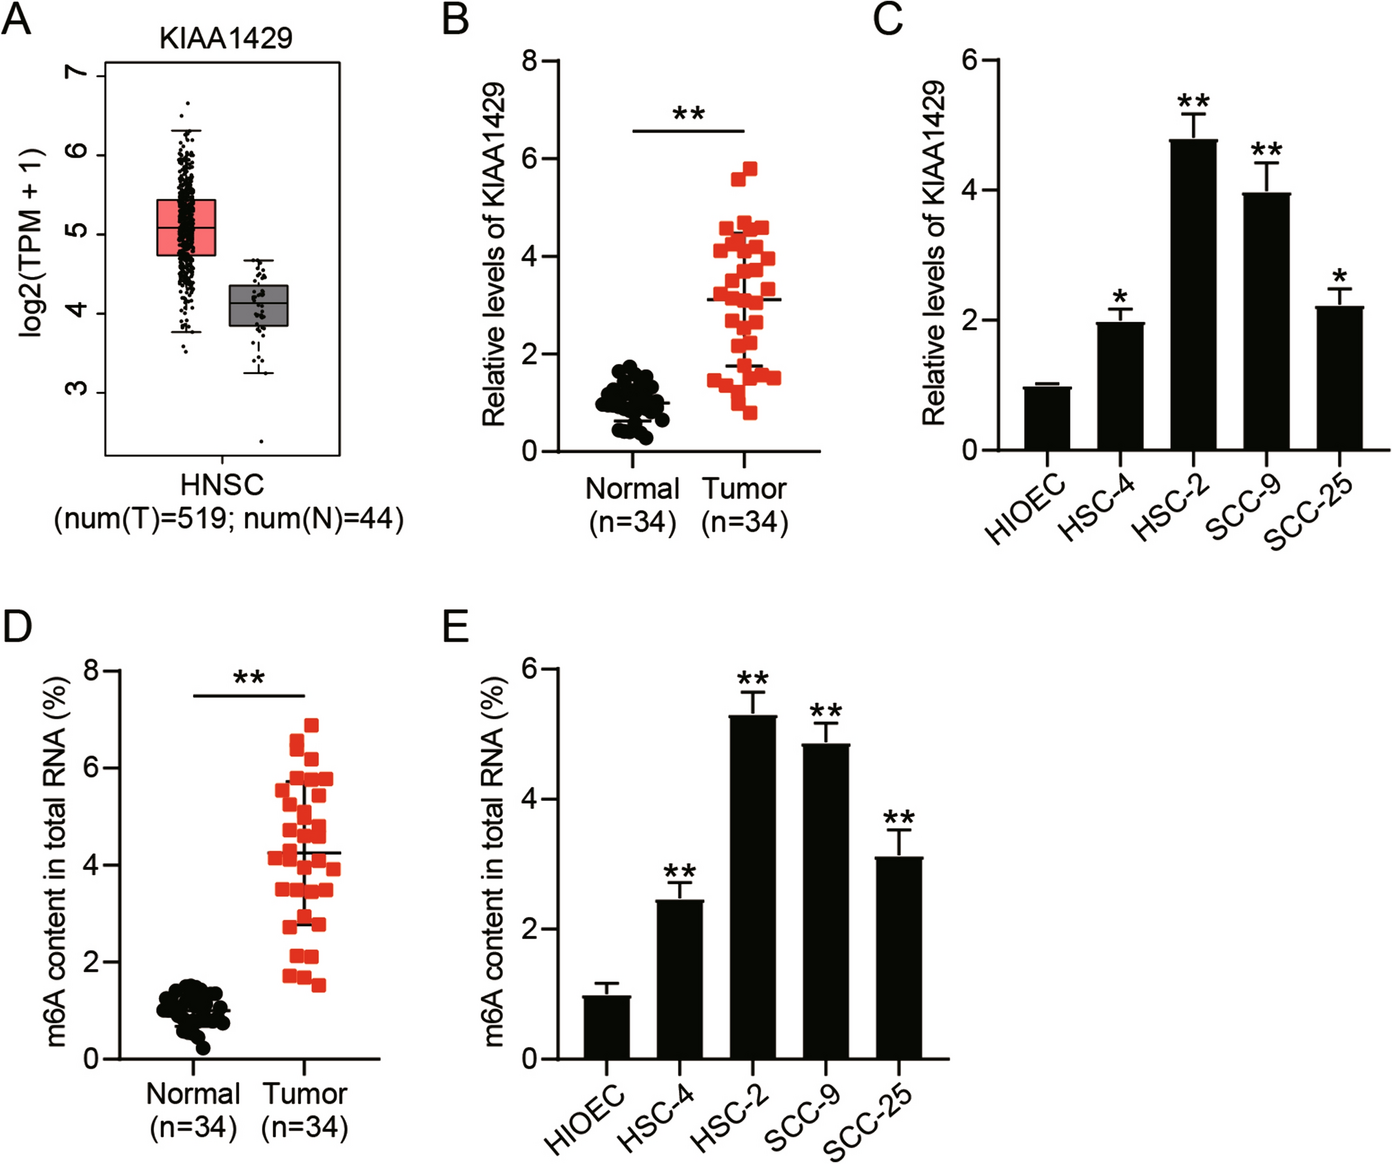 KIAA1429 promotes the malignancy of oral squamous cell carcinoma by regulating CA9 m6A methylation